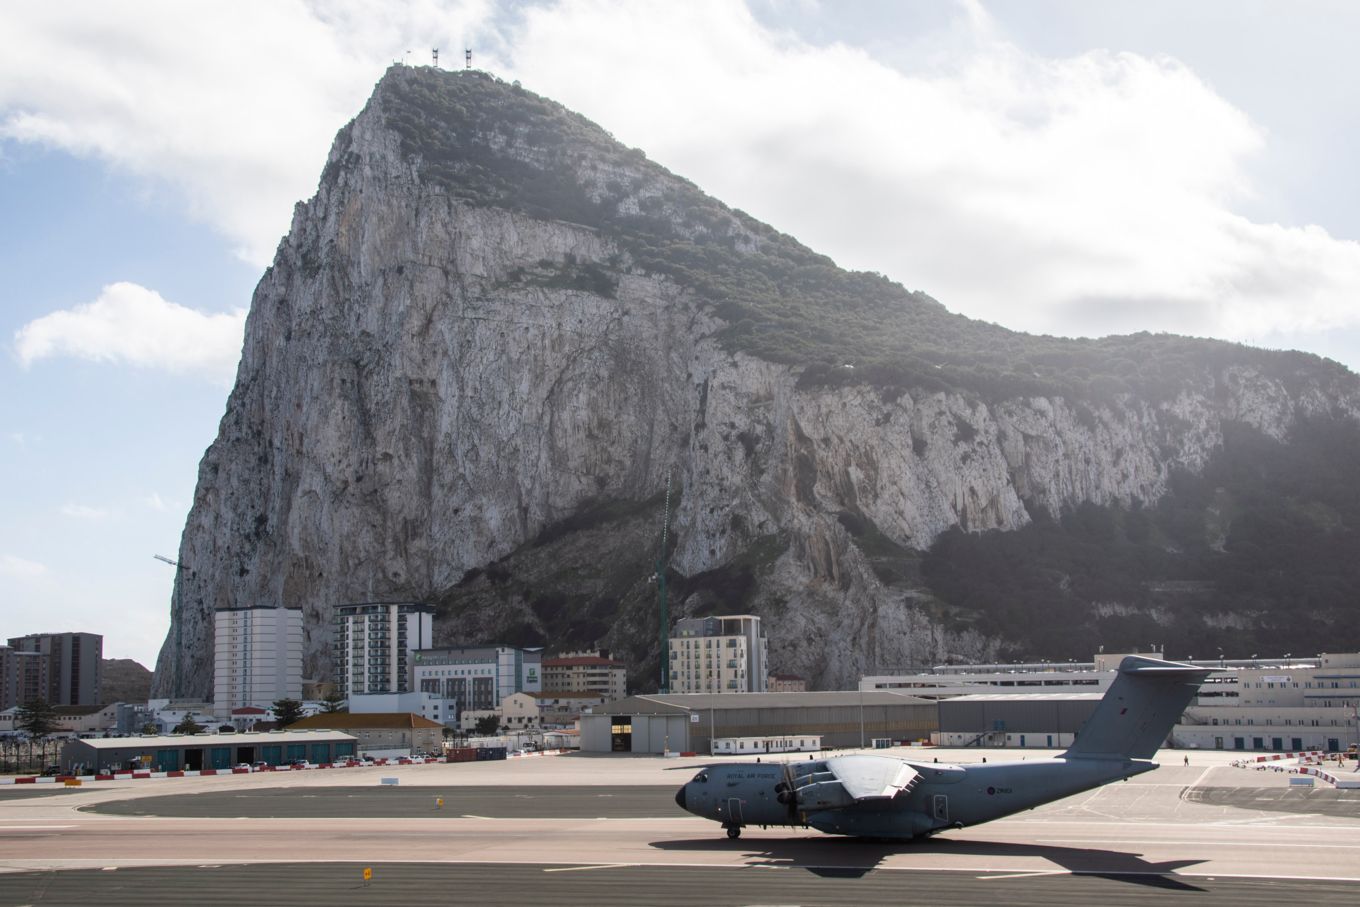 After a refuelling stop at Gibraltar, the RAF A400M Atlas transport aircraft flew into Gao Mali.